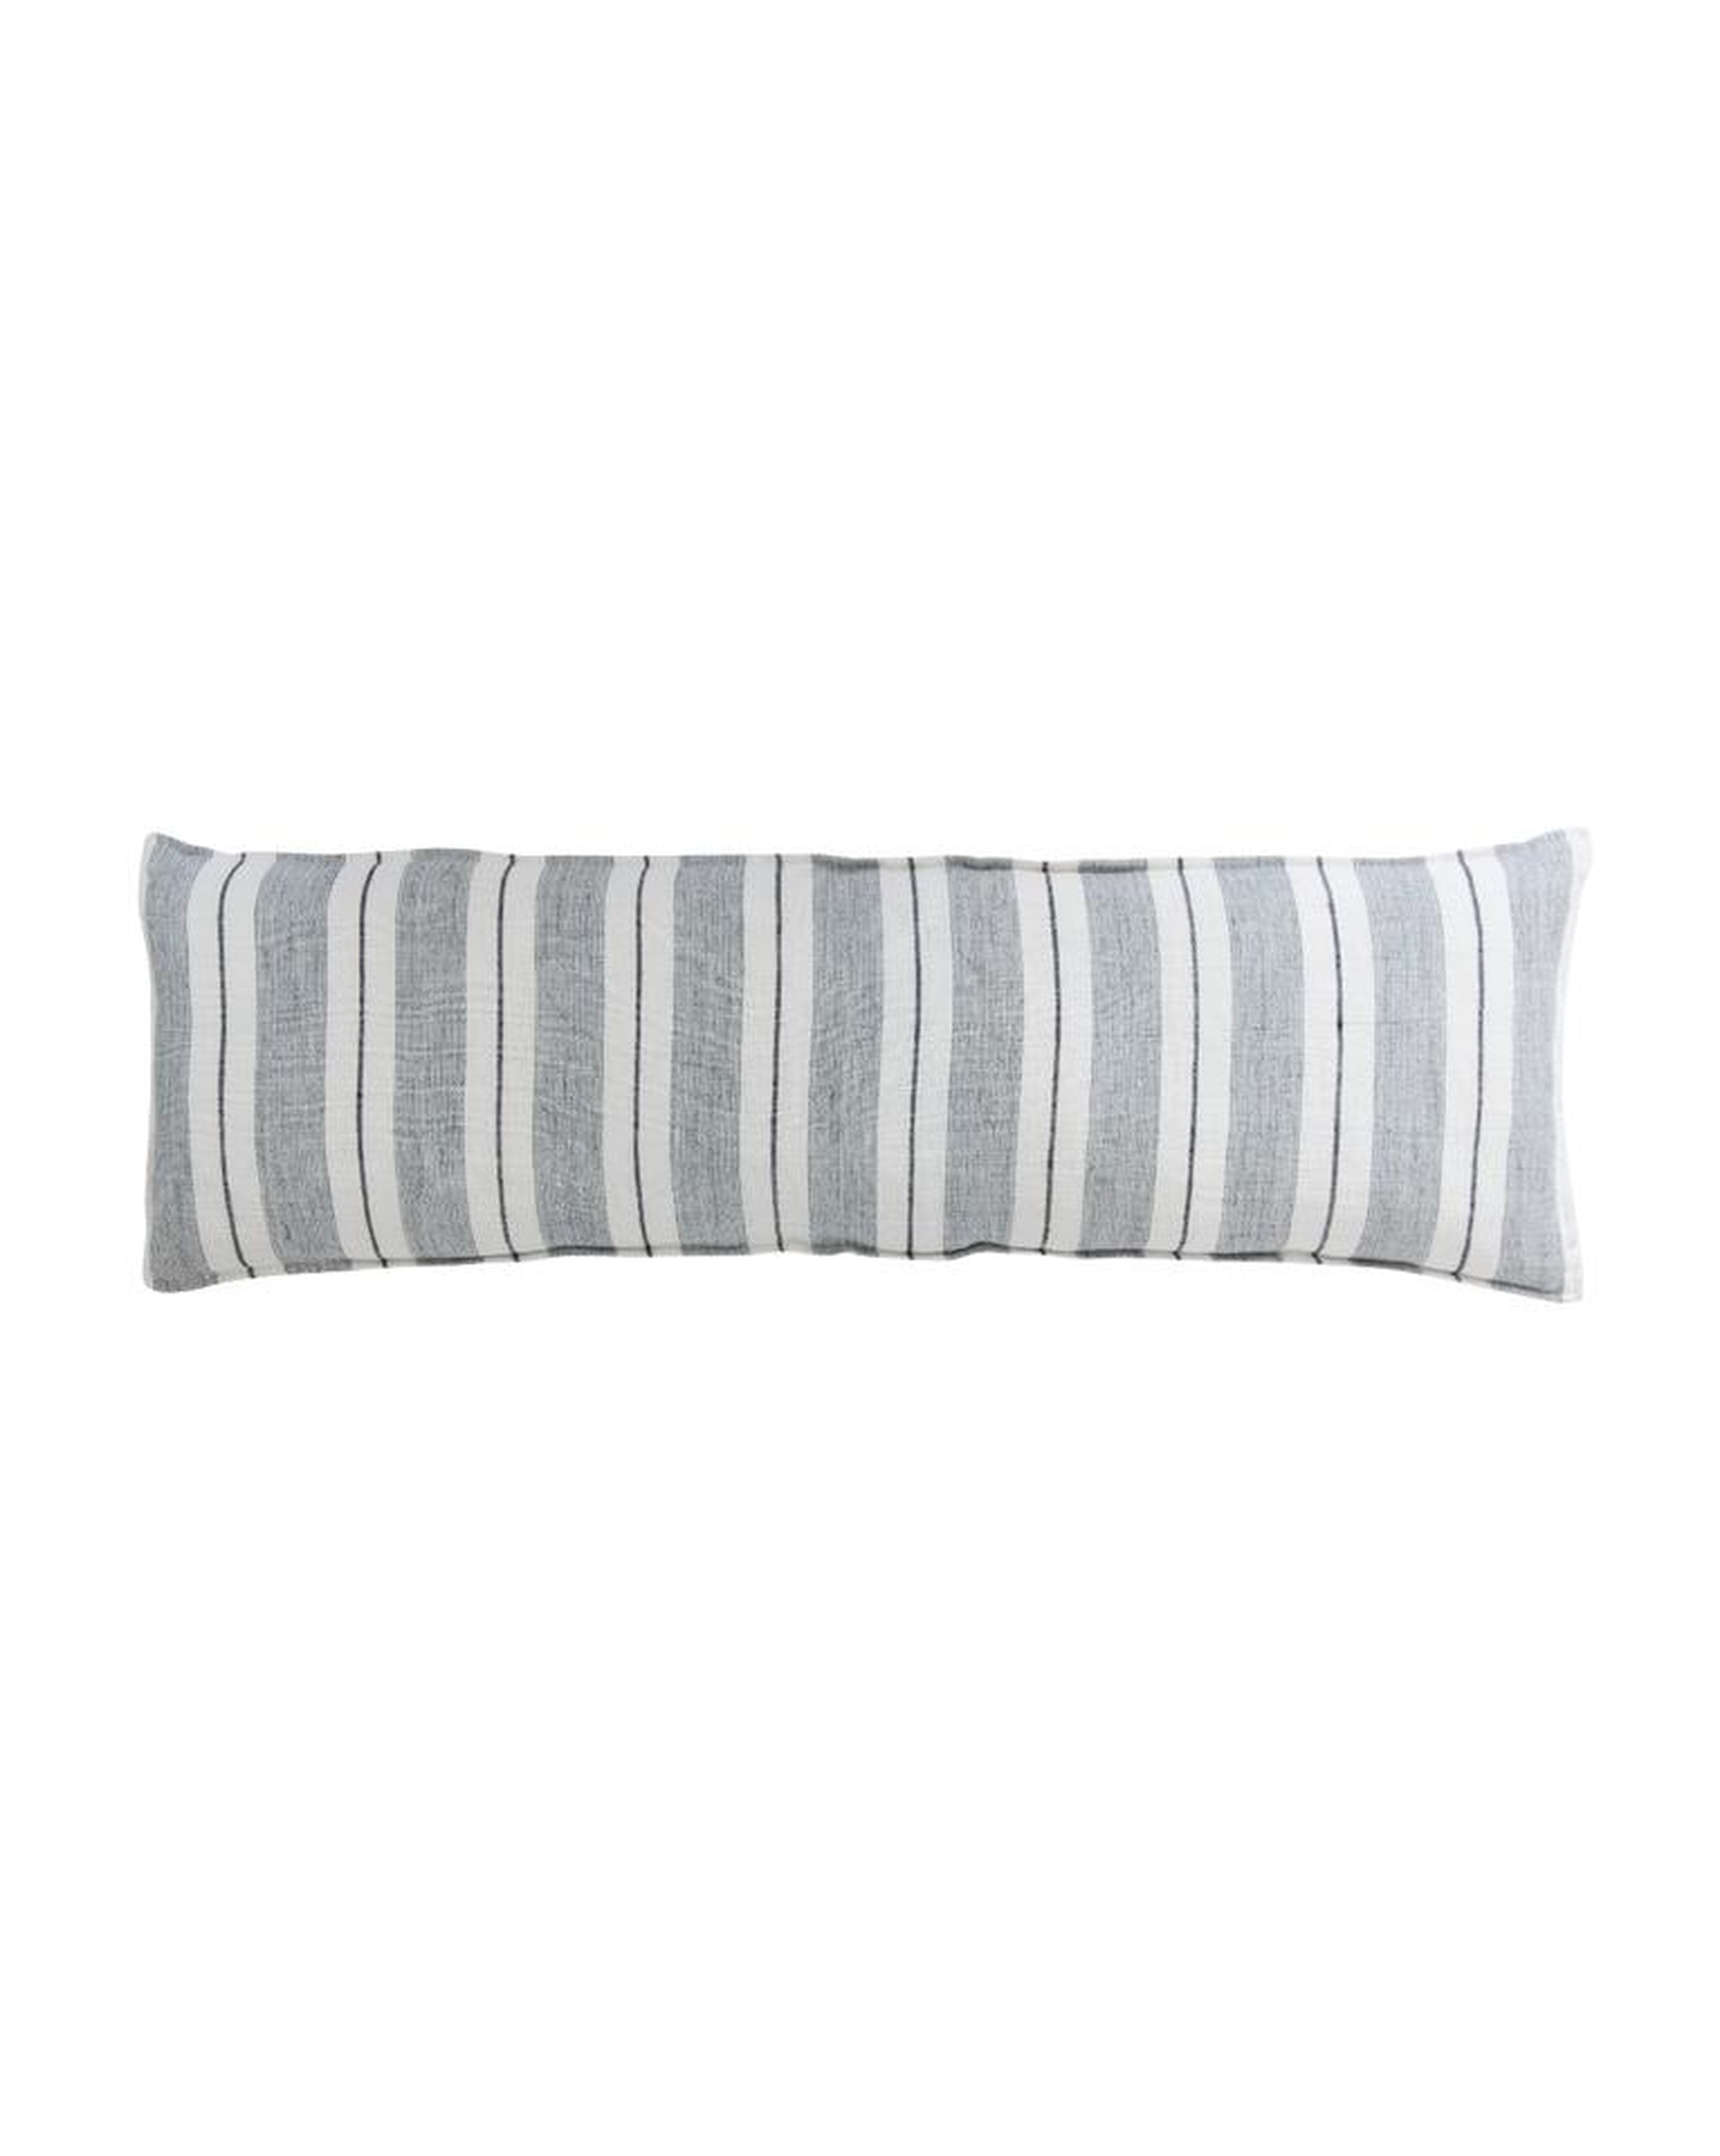 MADRI PILLOW WITH DOWN INSERT, 18" x 60" - McGee & Co.